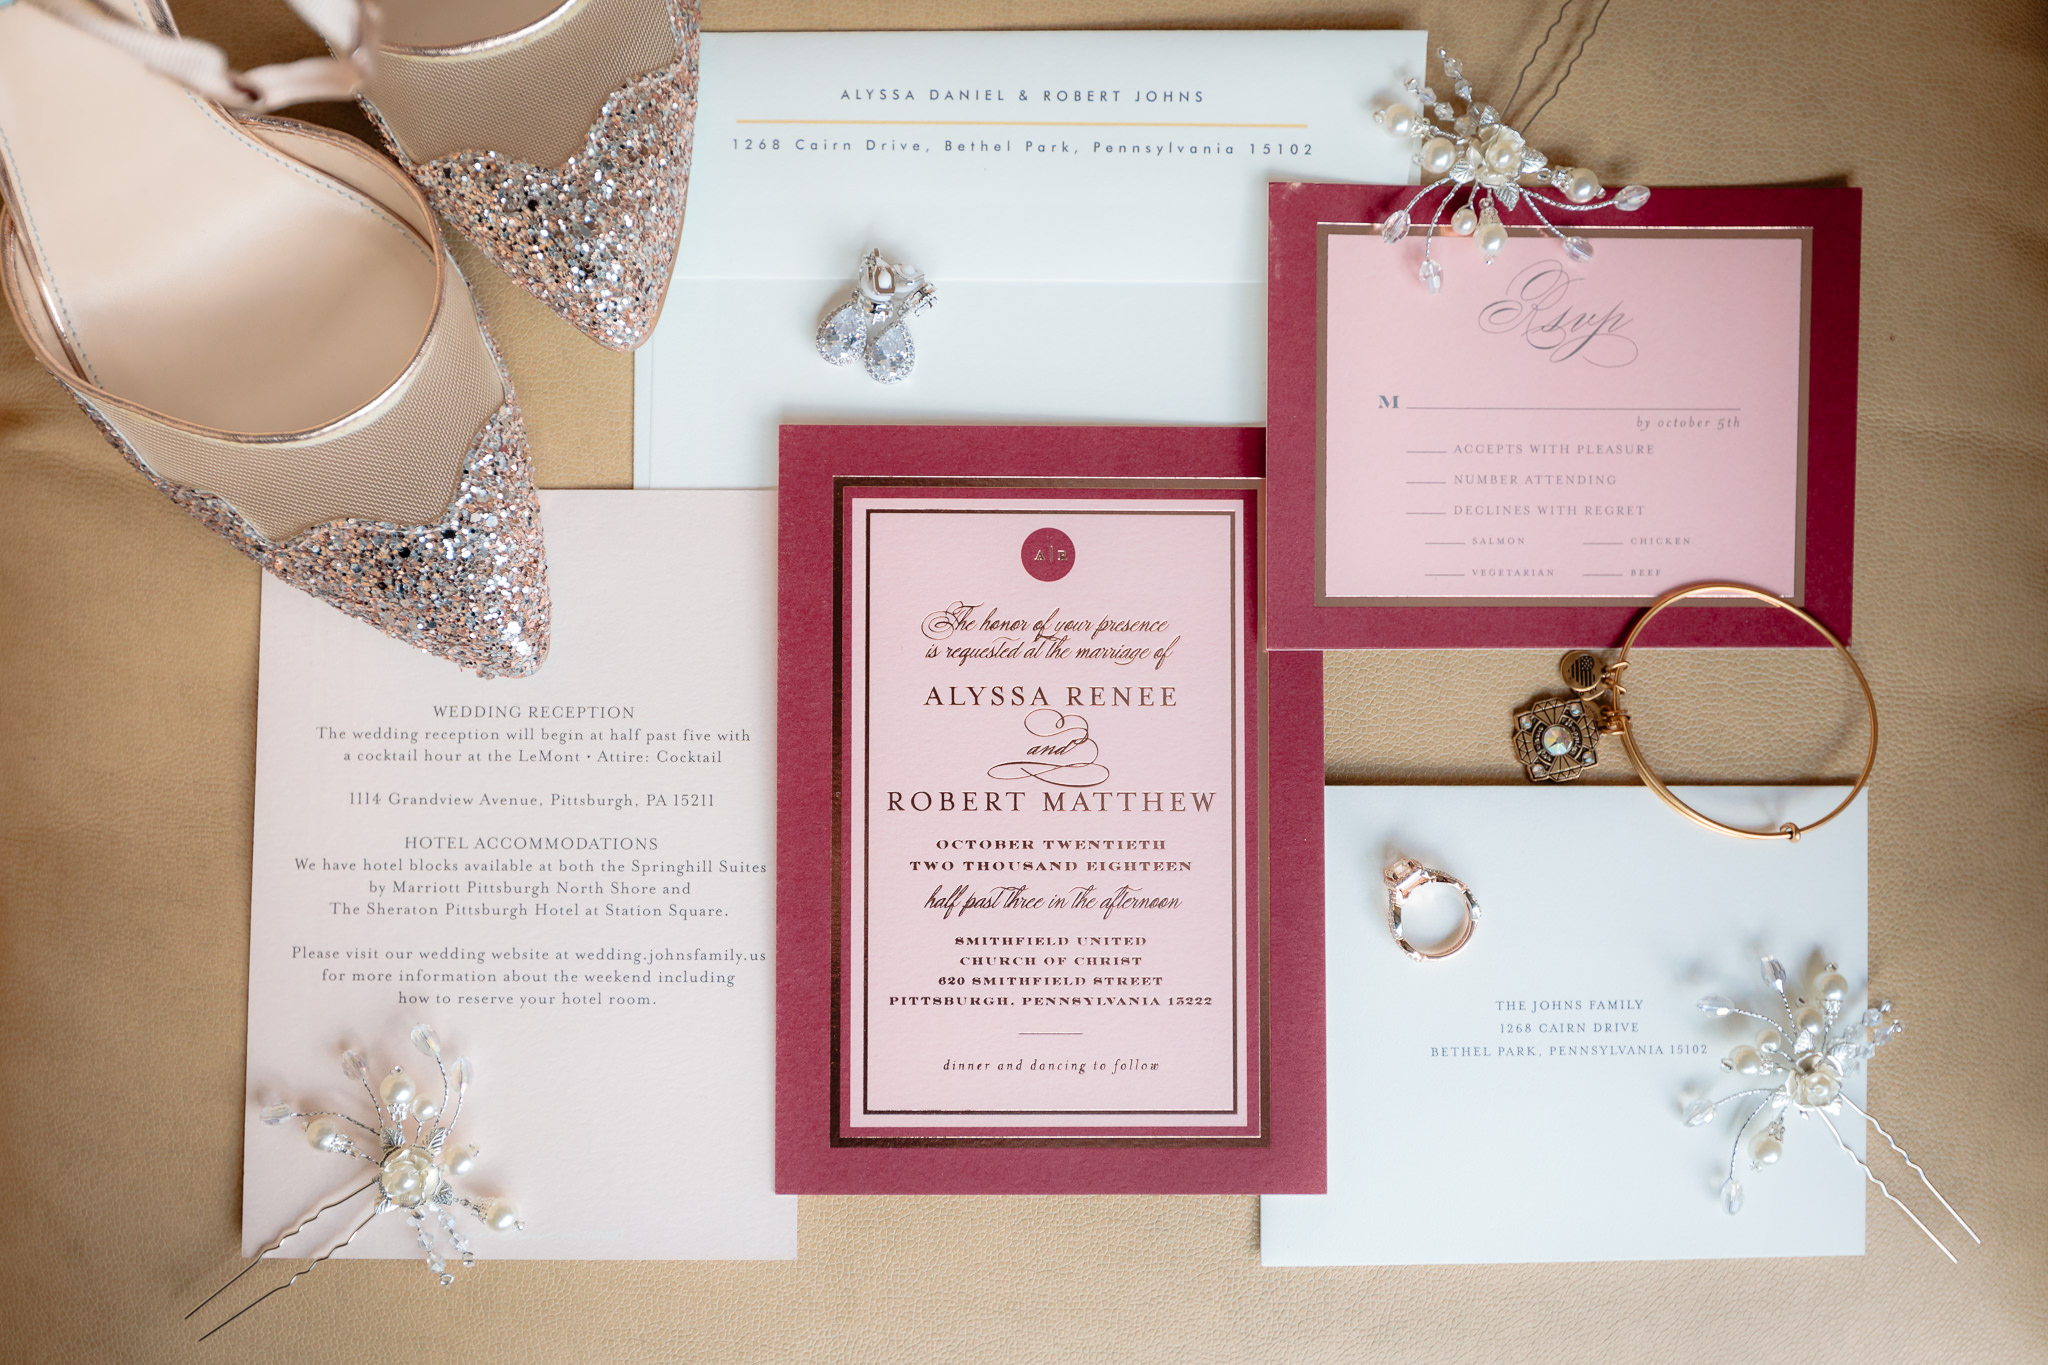 Burgundy & pink wedding invitations by Minted with bride's gold shoes and jewelry